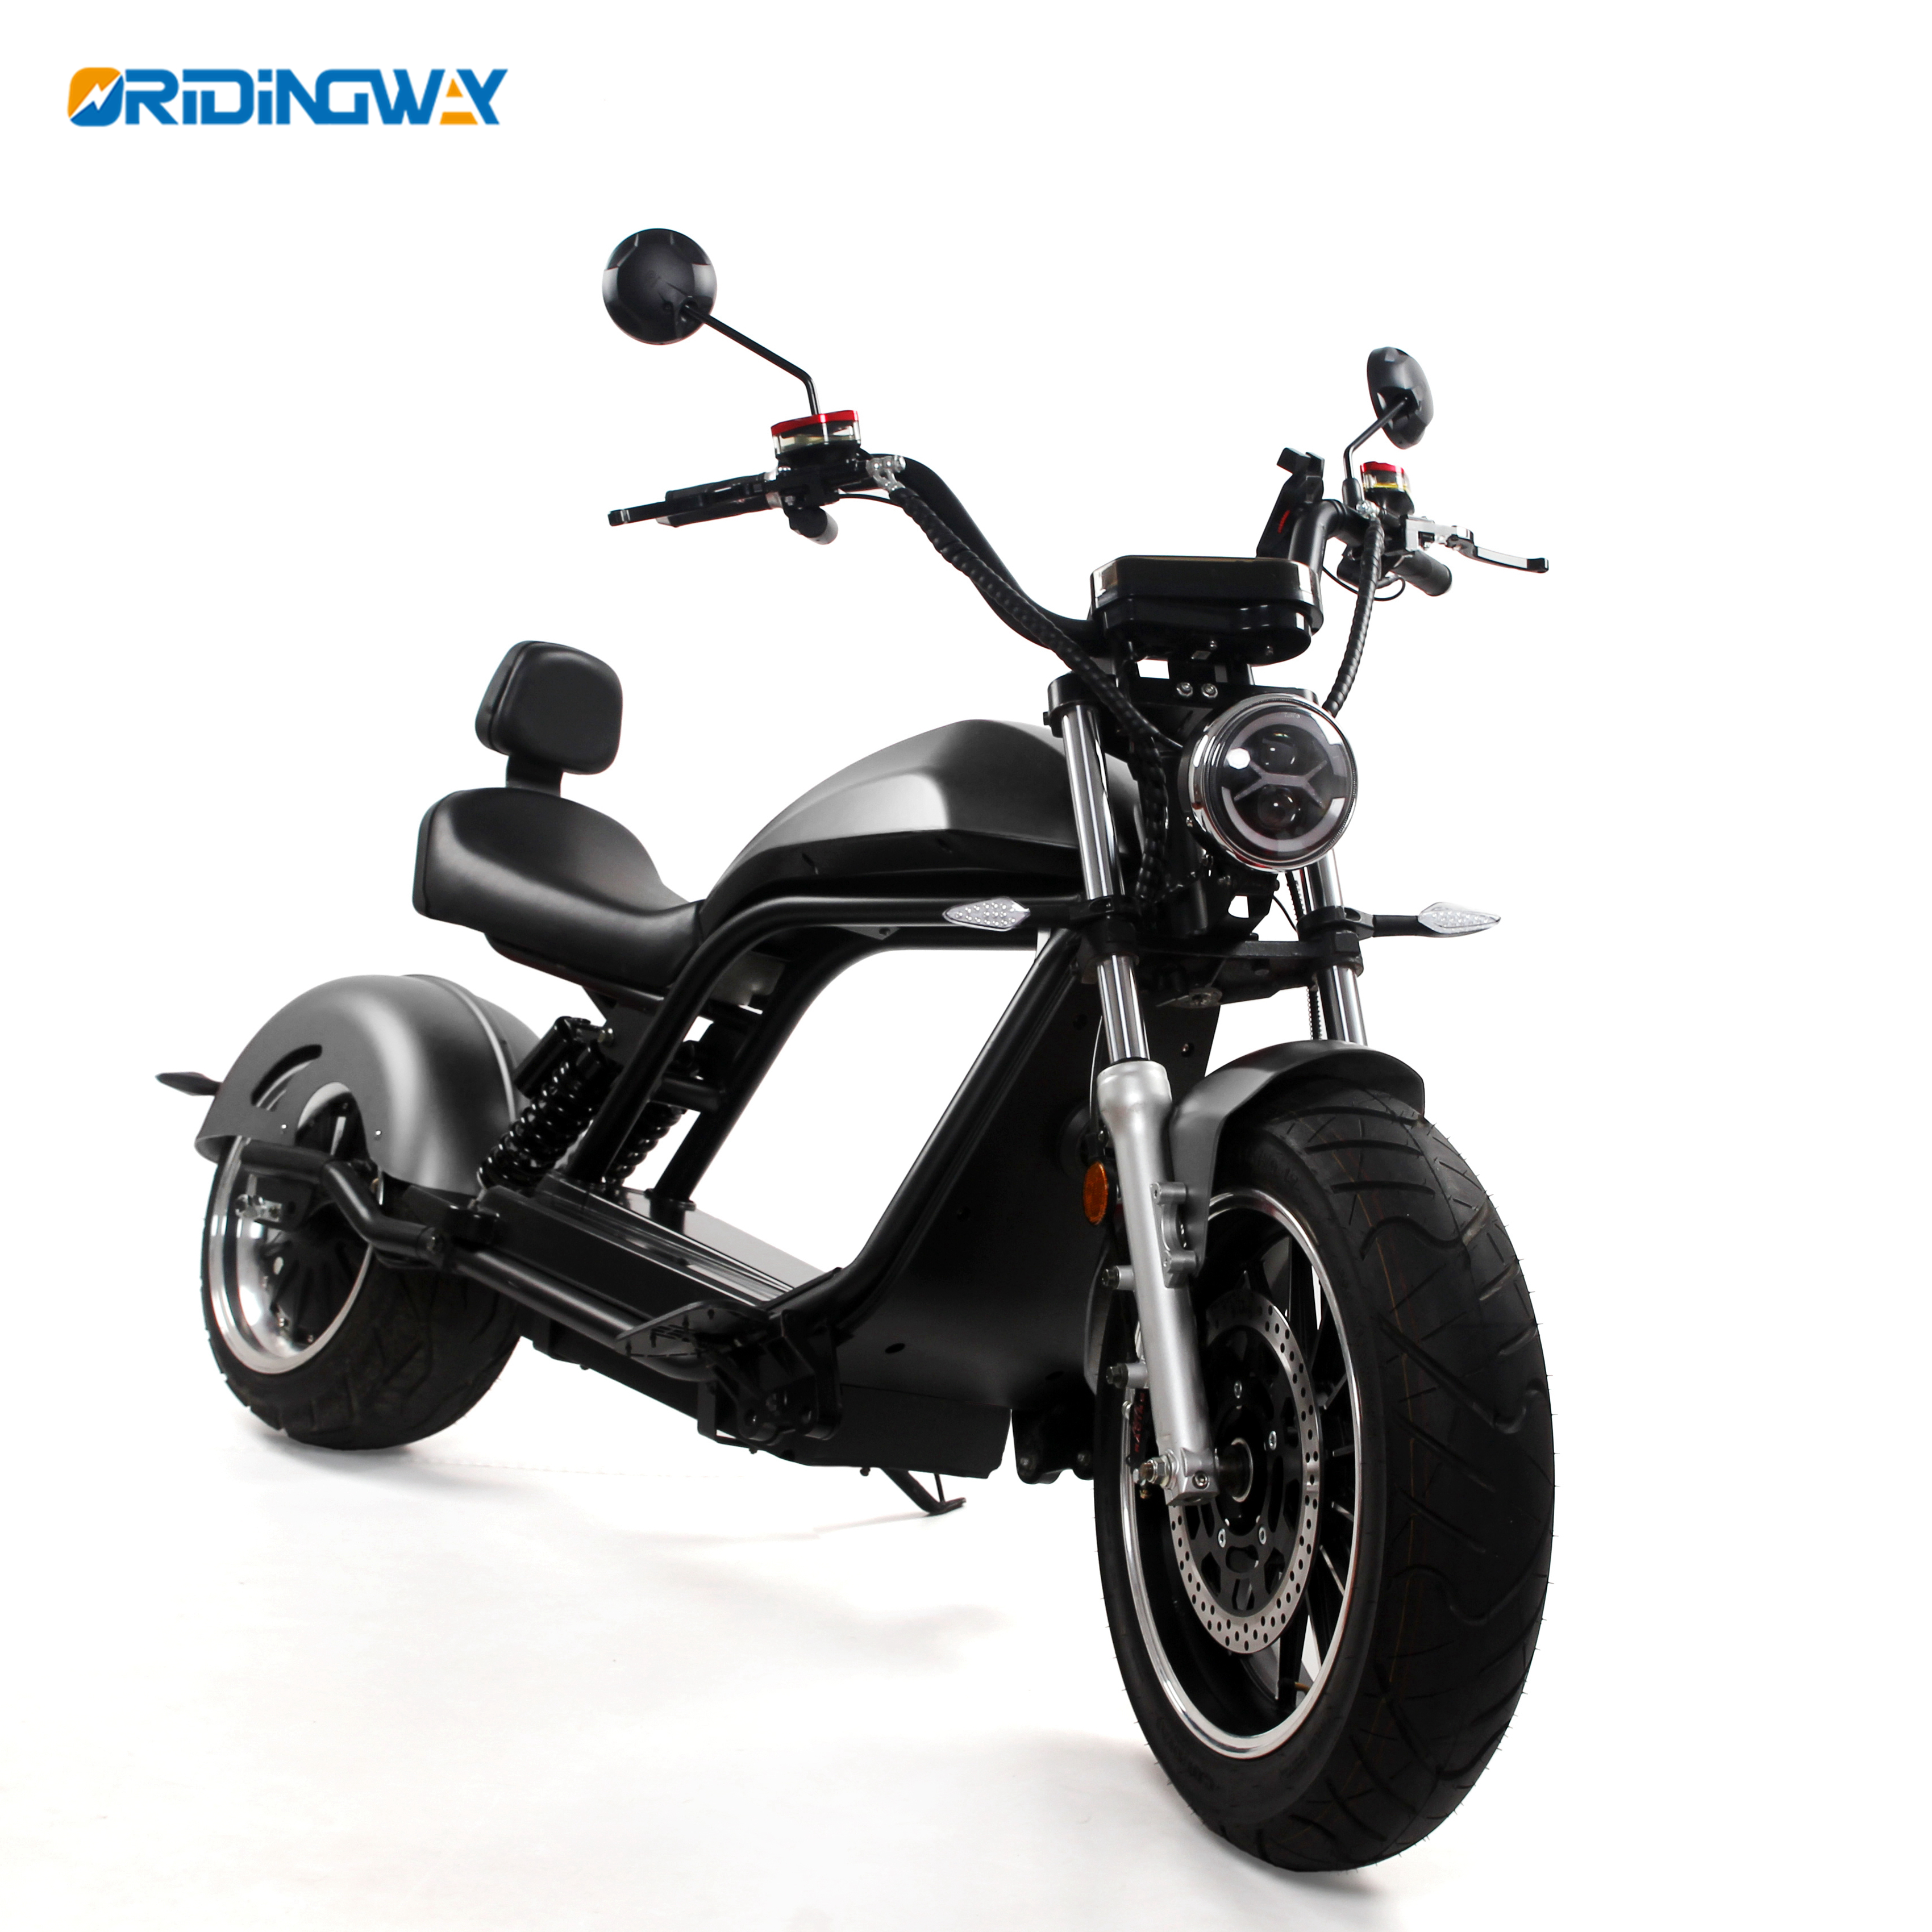 ORIDINGWAY Luqi 3000W citycoco scooter off road Featured Image